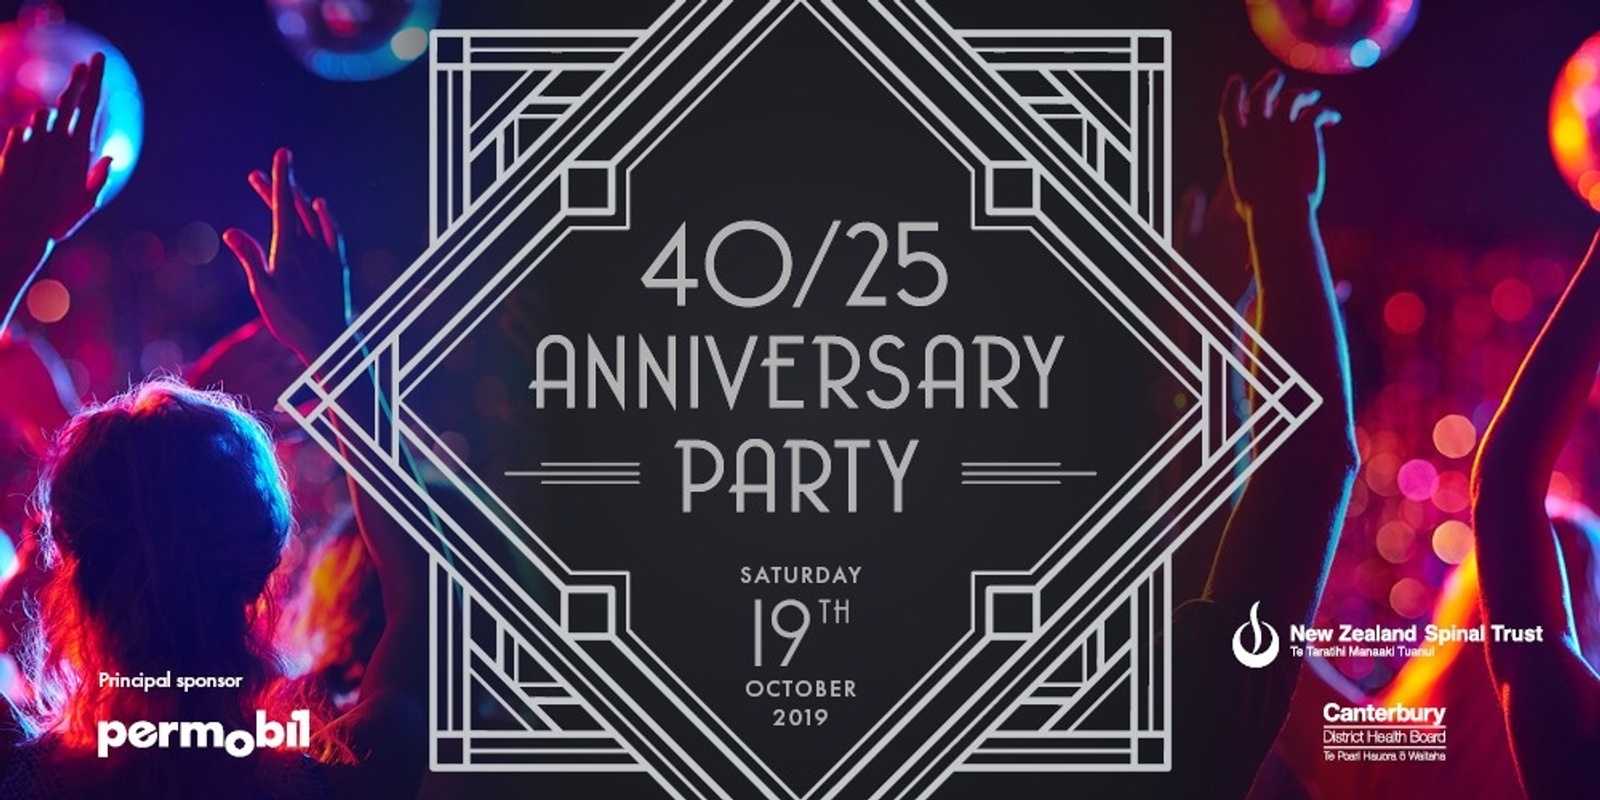 Banner image for 40/25 Anniversary Party